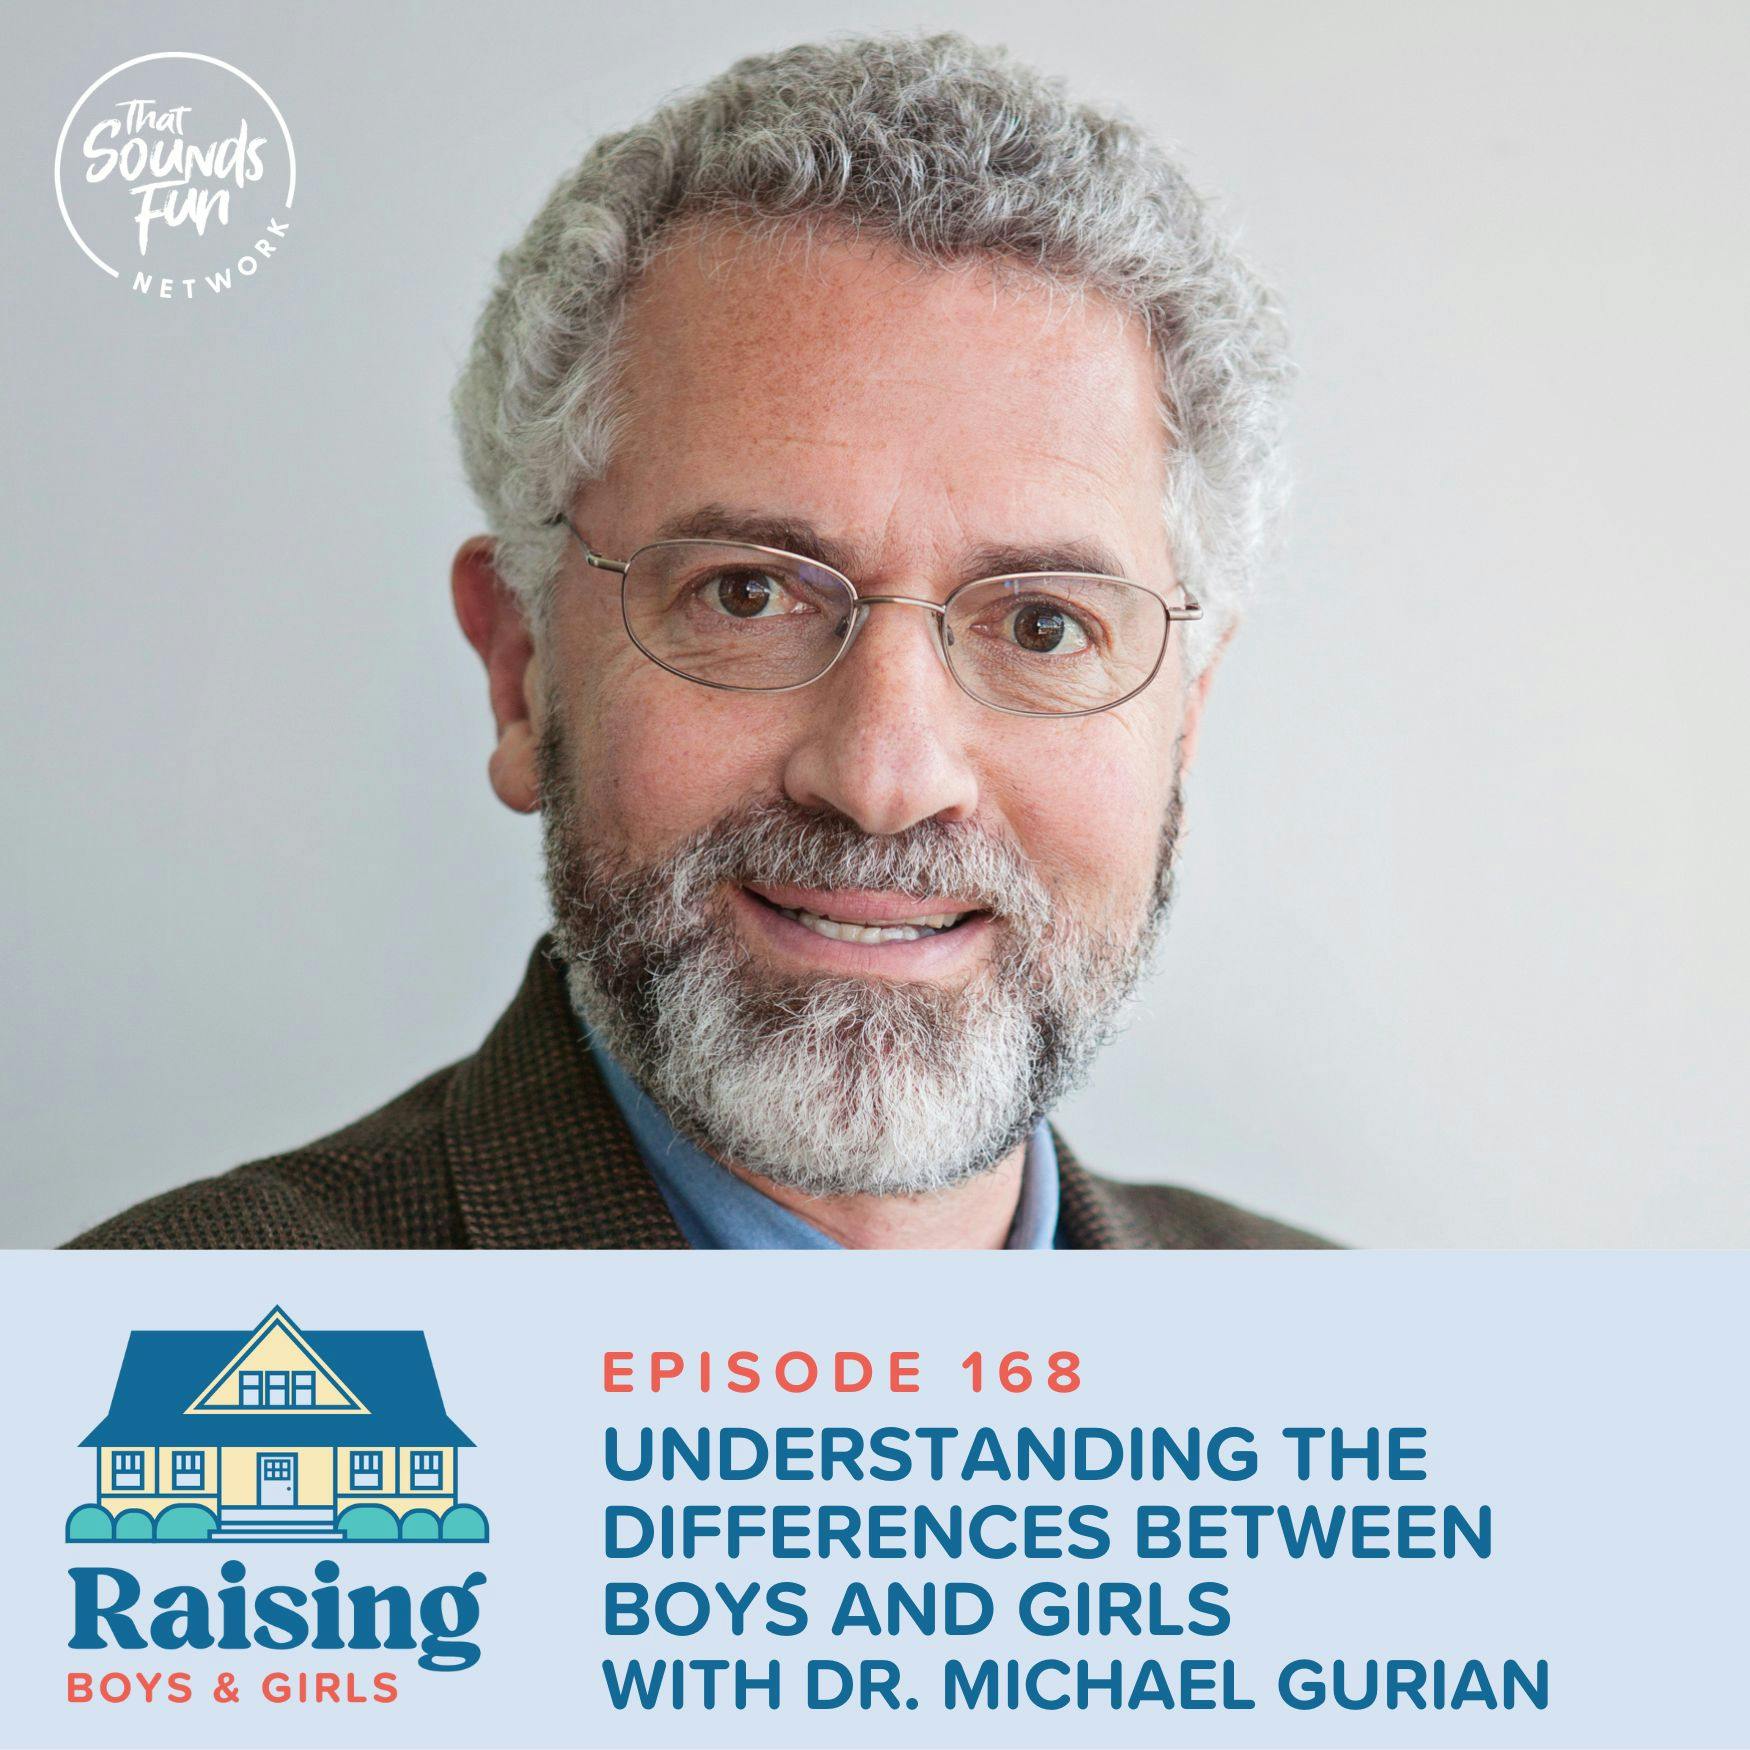 Episode 168: Understanding the Differences Between Boys and Girls with Dr. Michael Gurian